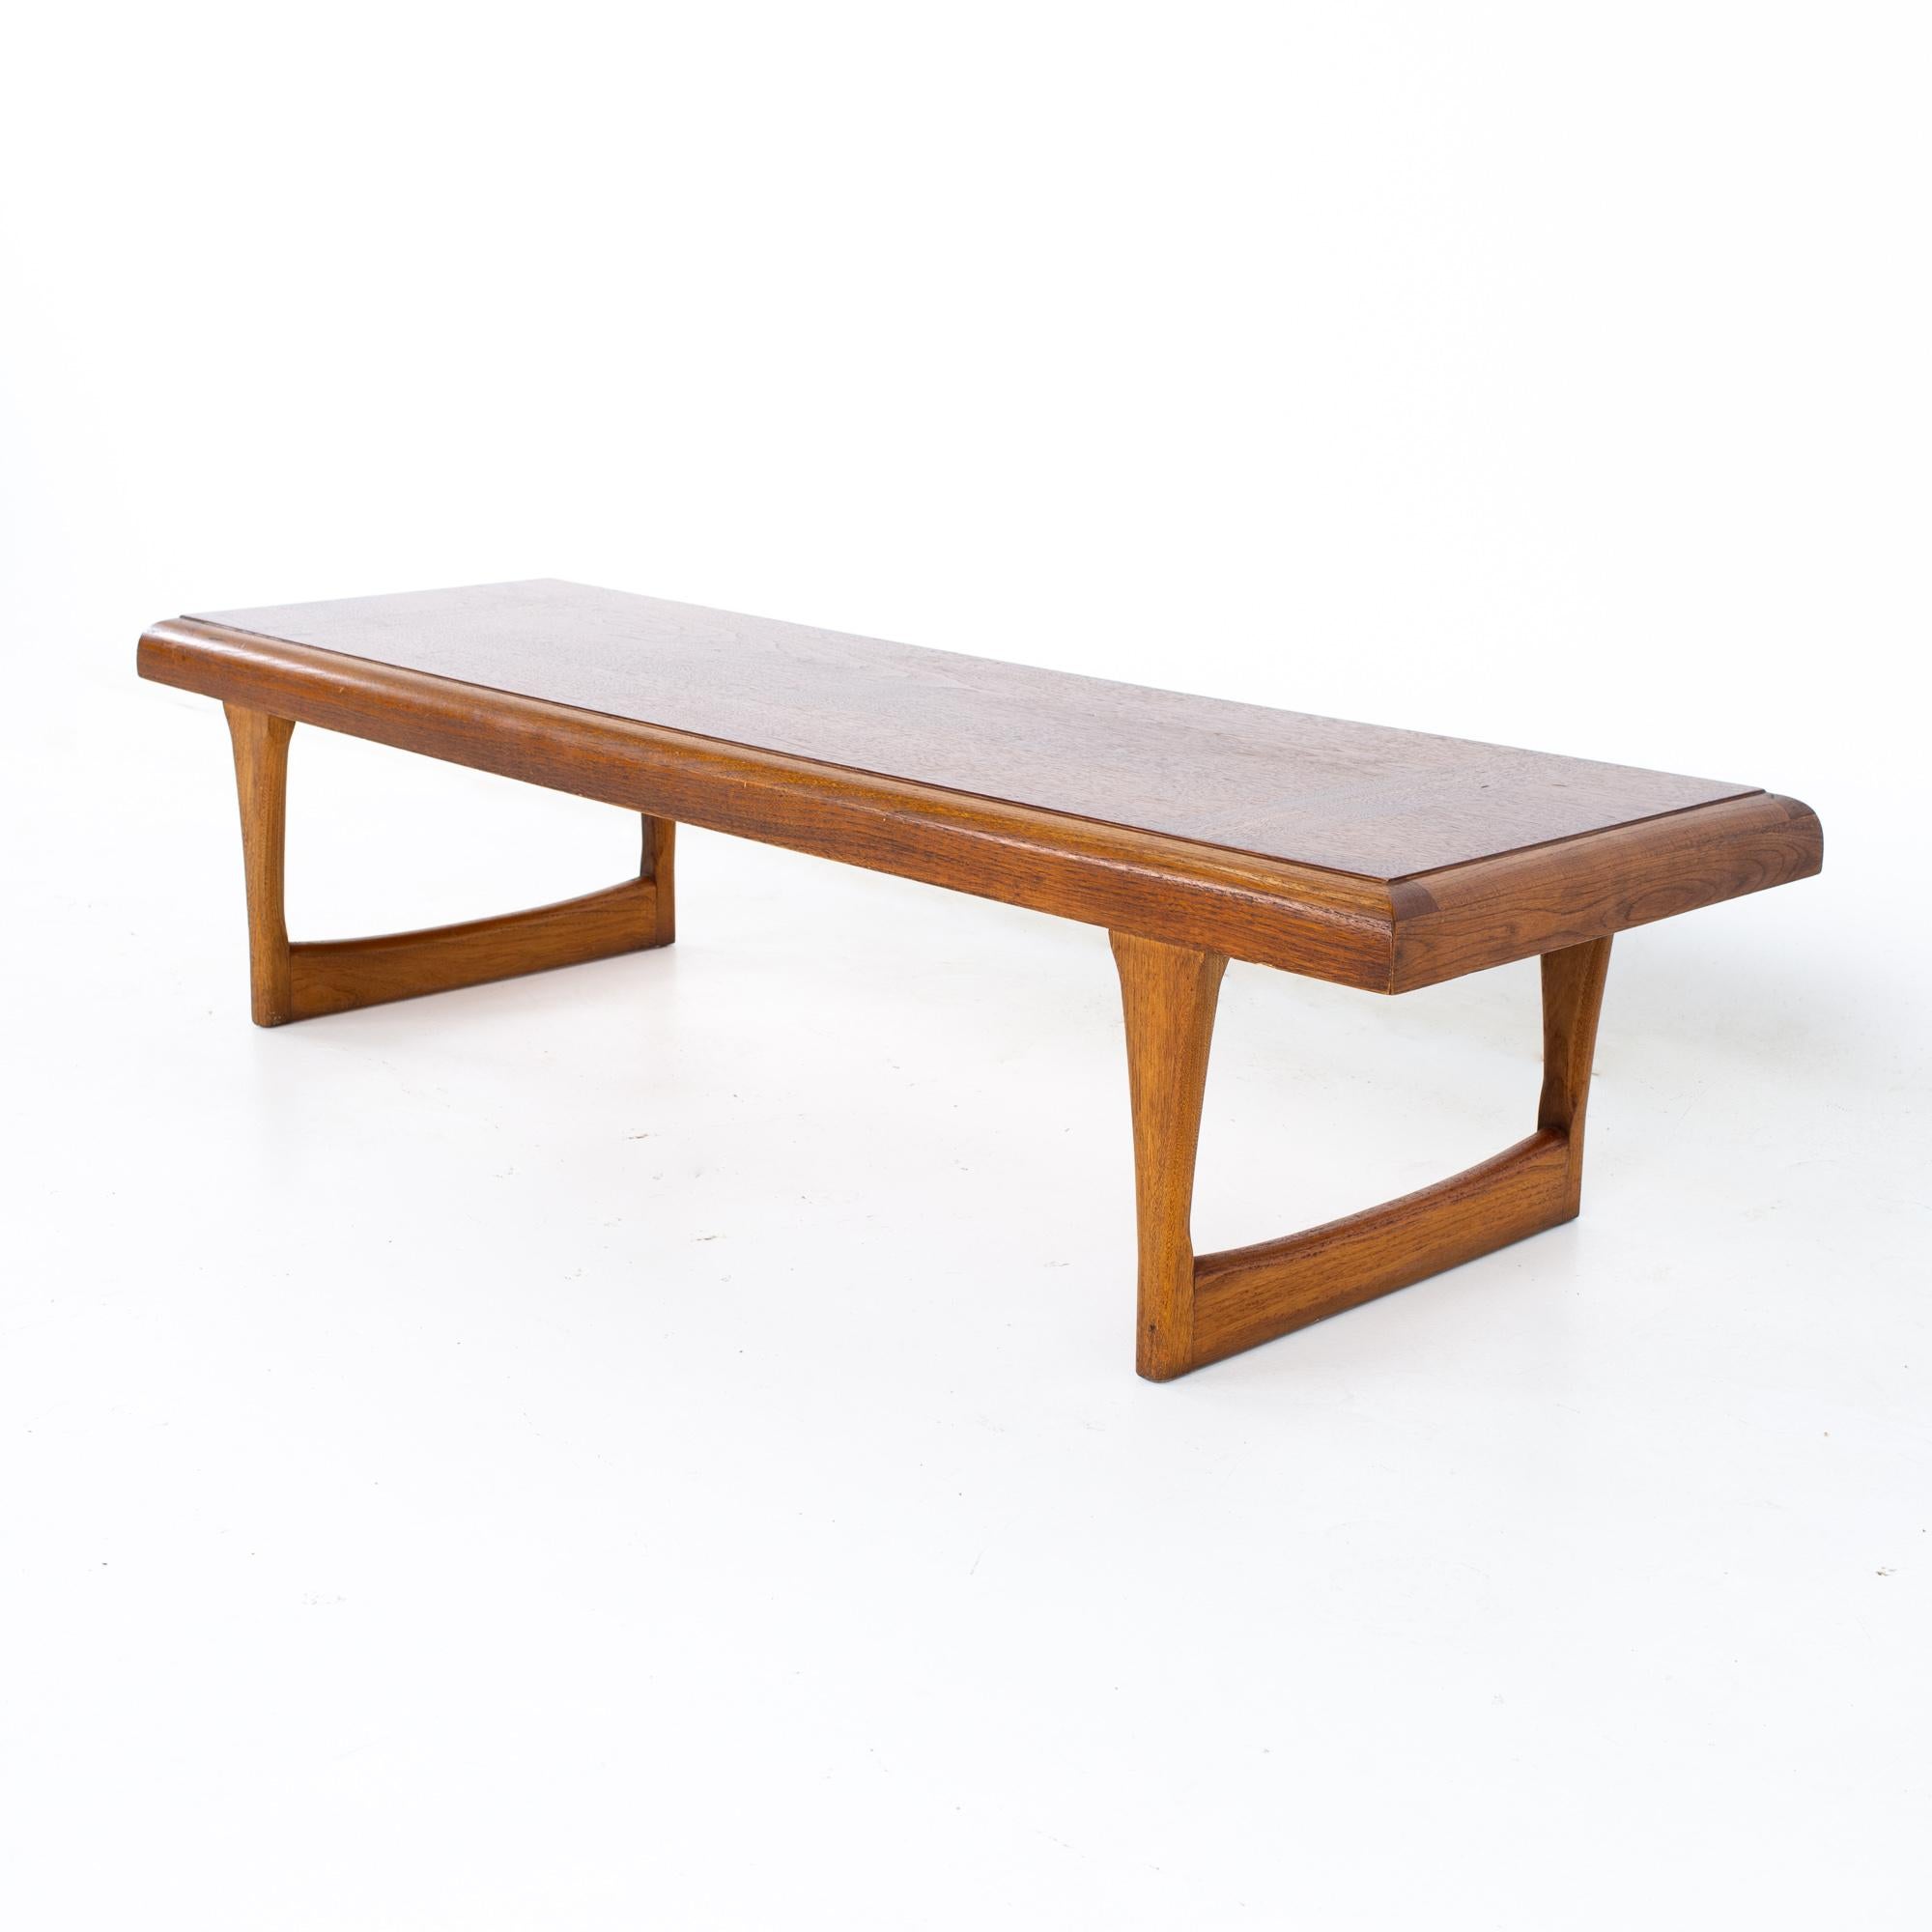 Lane Danish style Mid Century walnut sleigh leg coffee table
Coffee table measures: 60 wide x 20.5 deep x 14.5 inches high

All pieces of furniture can be had in what we call restored vintage condition. That means the piece is restored upon